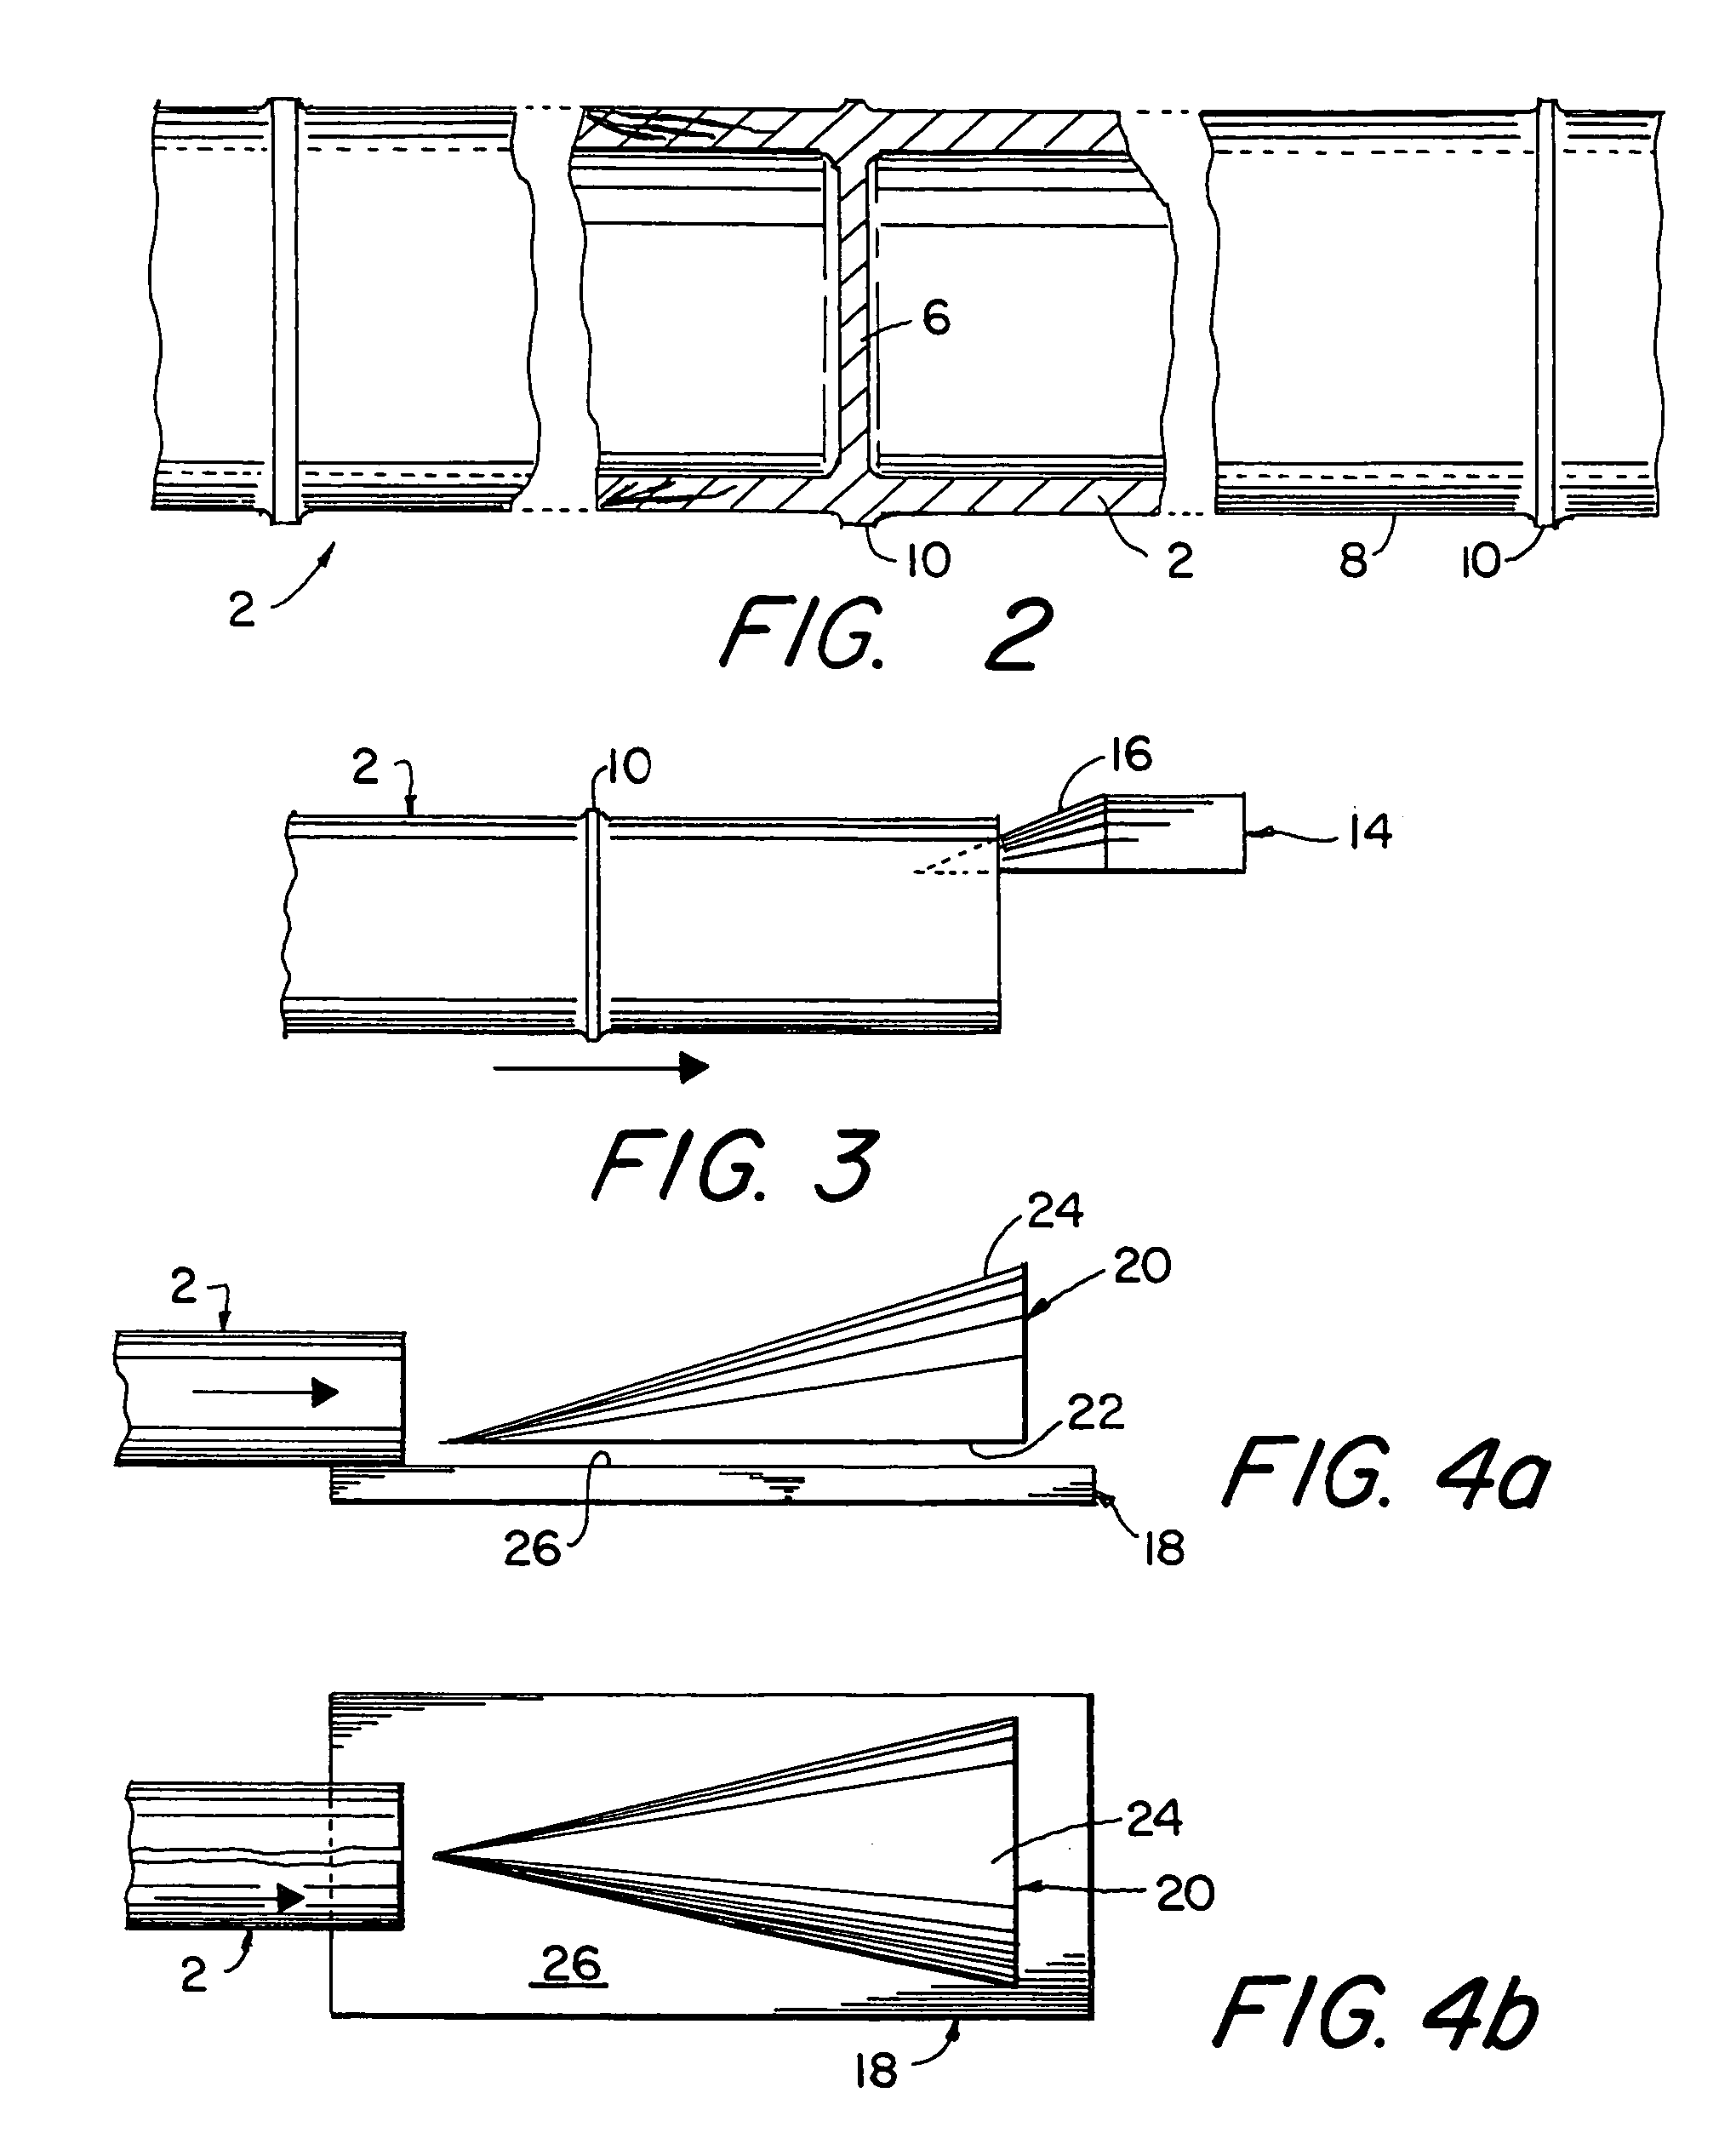 Elongate laminated wooden handles and method of manufacturing same